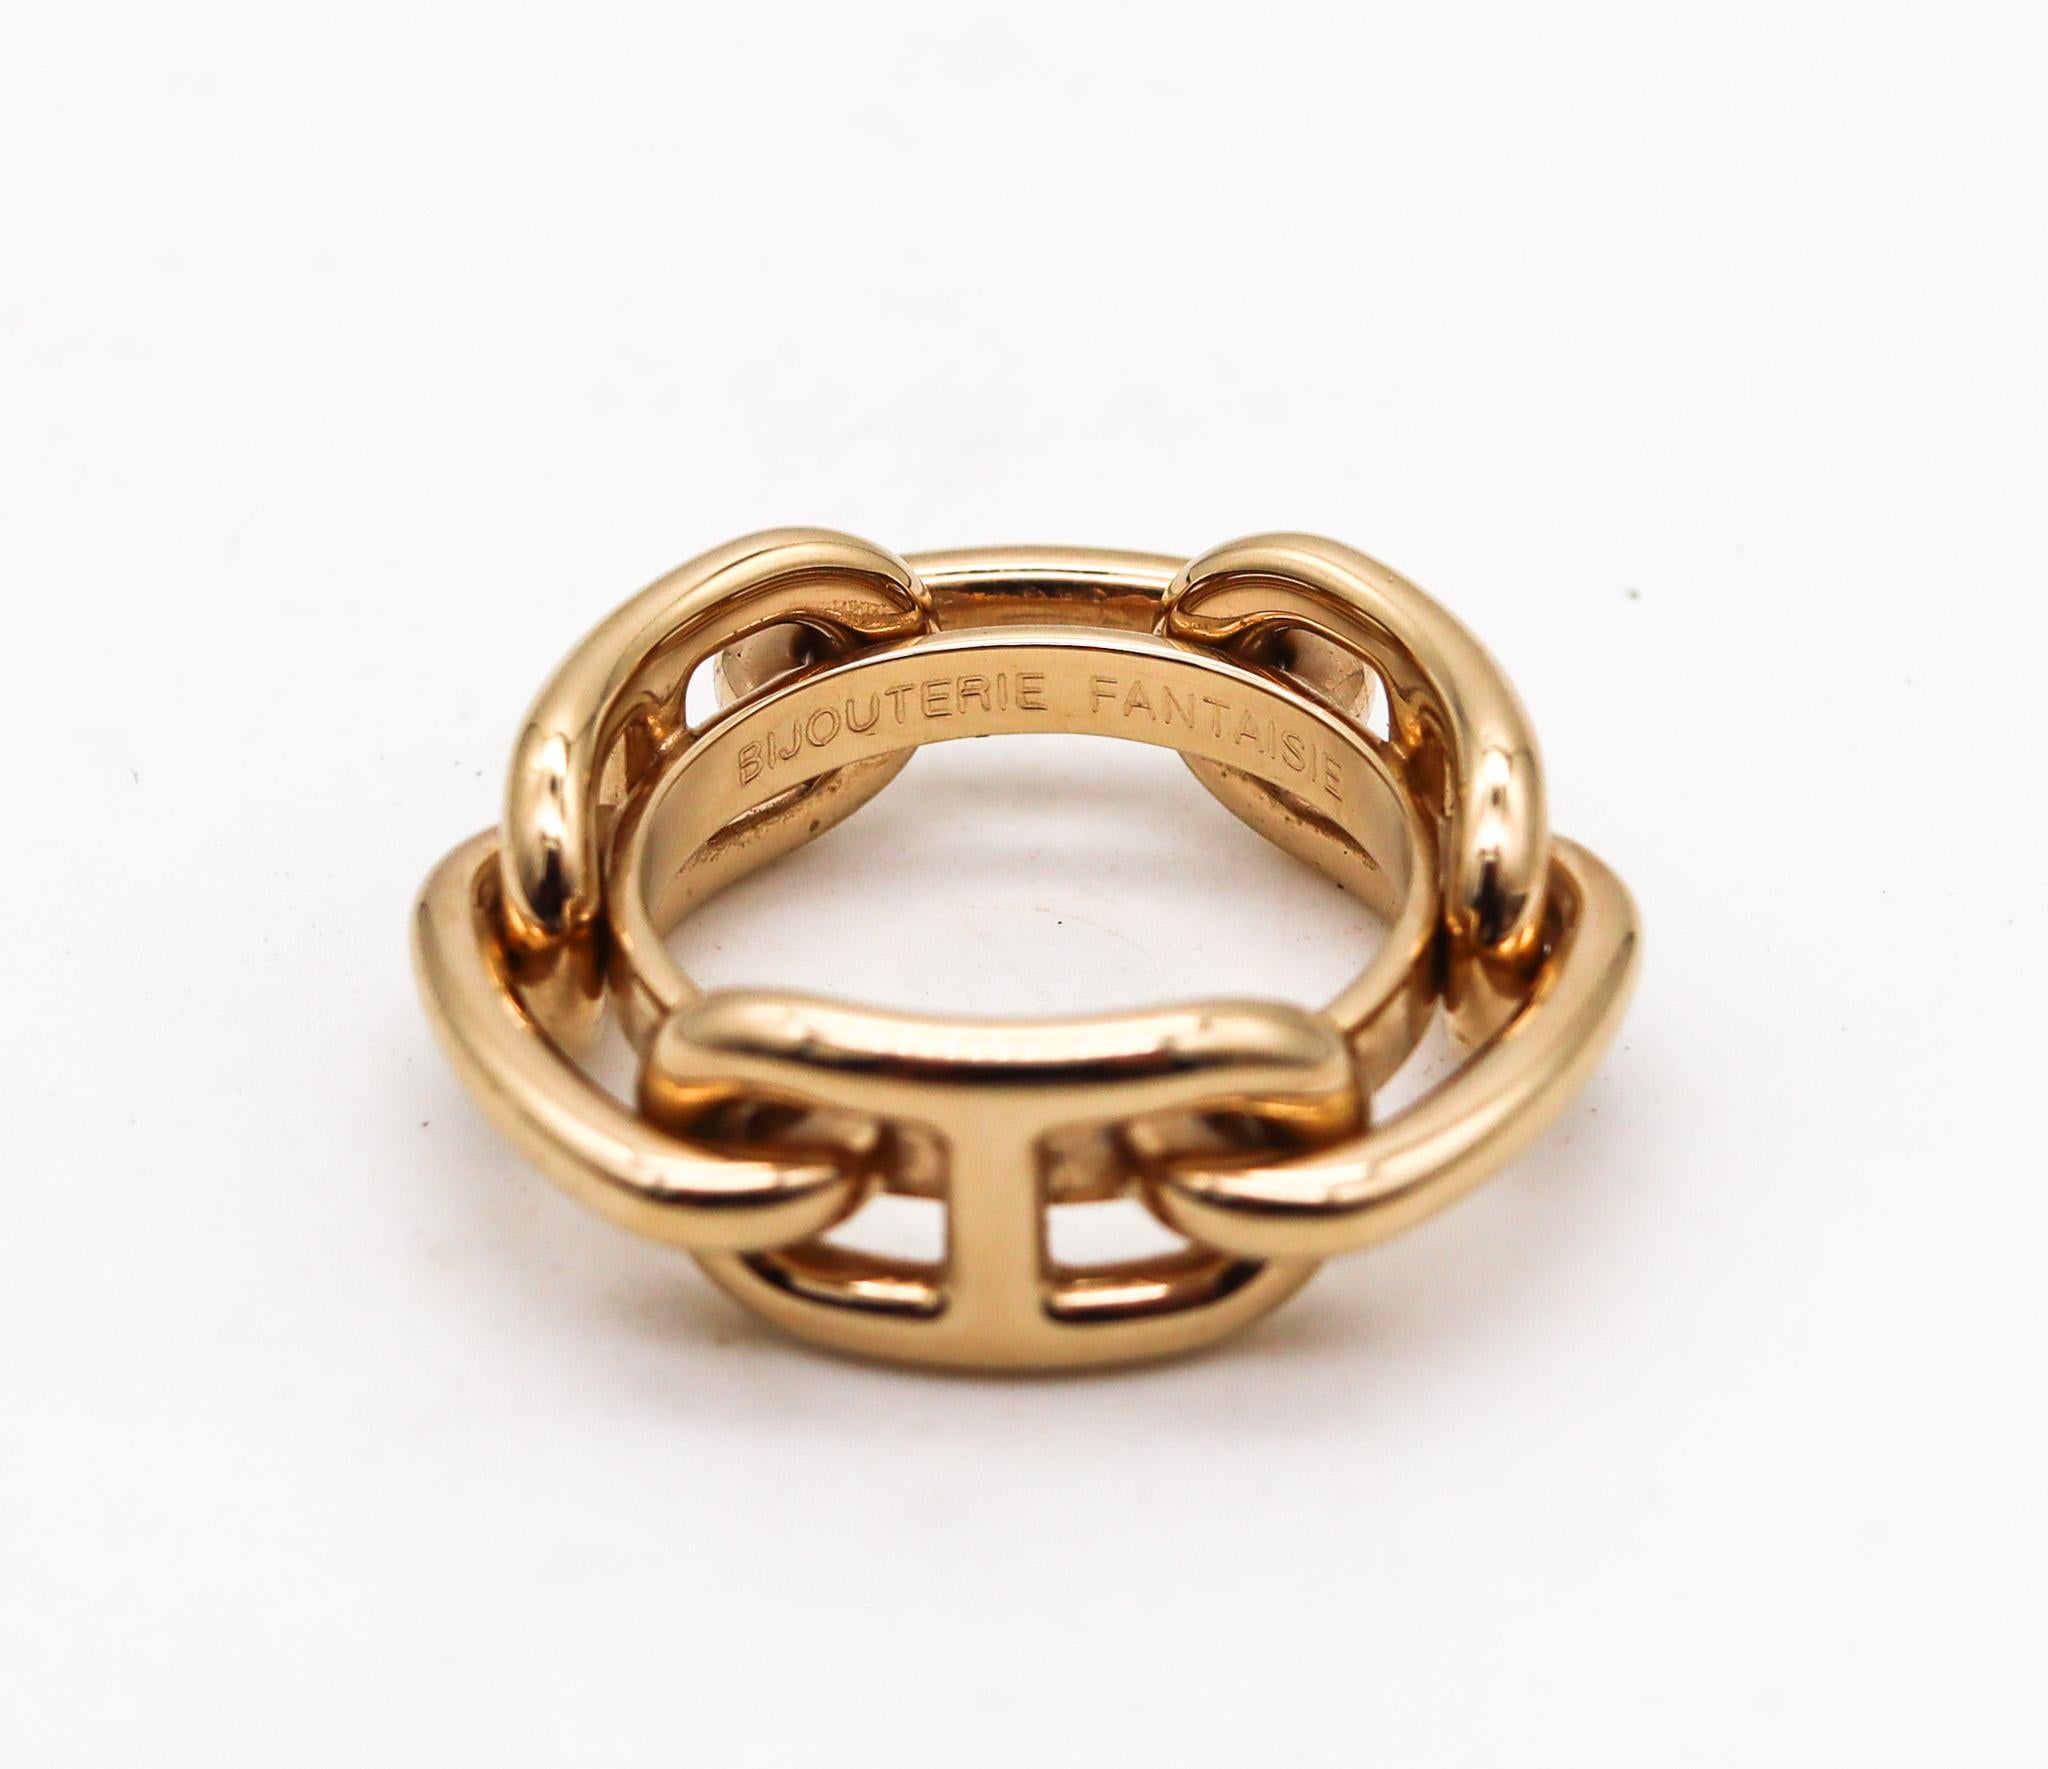 Modernist Hermes Paris Vintage Chain D'Ancre Scarf Ring In 18Kt Yellow Gold Plated In Box